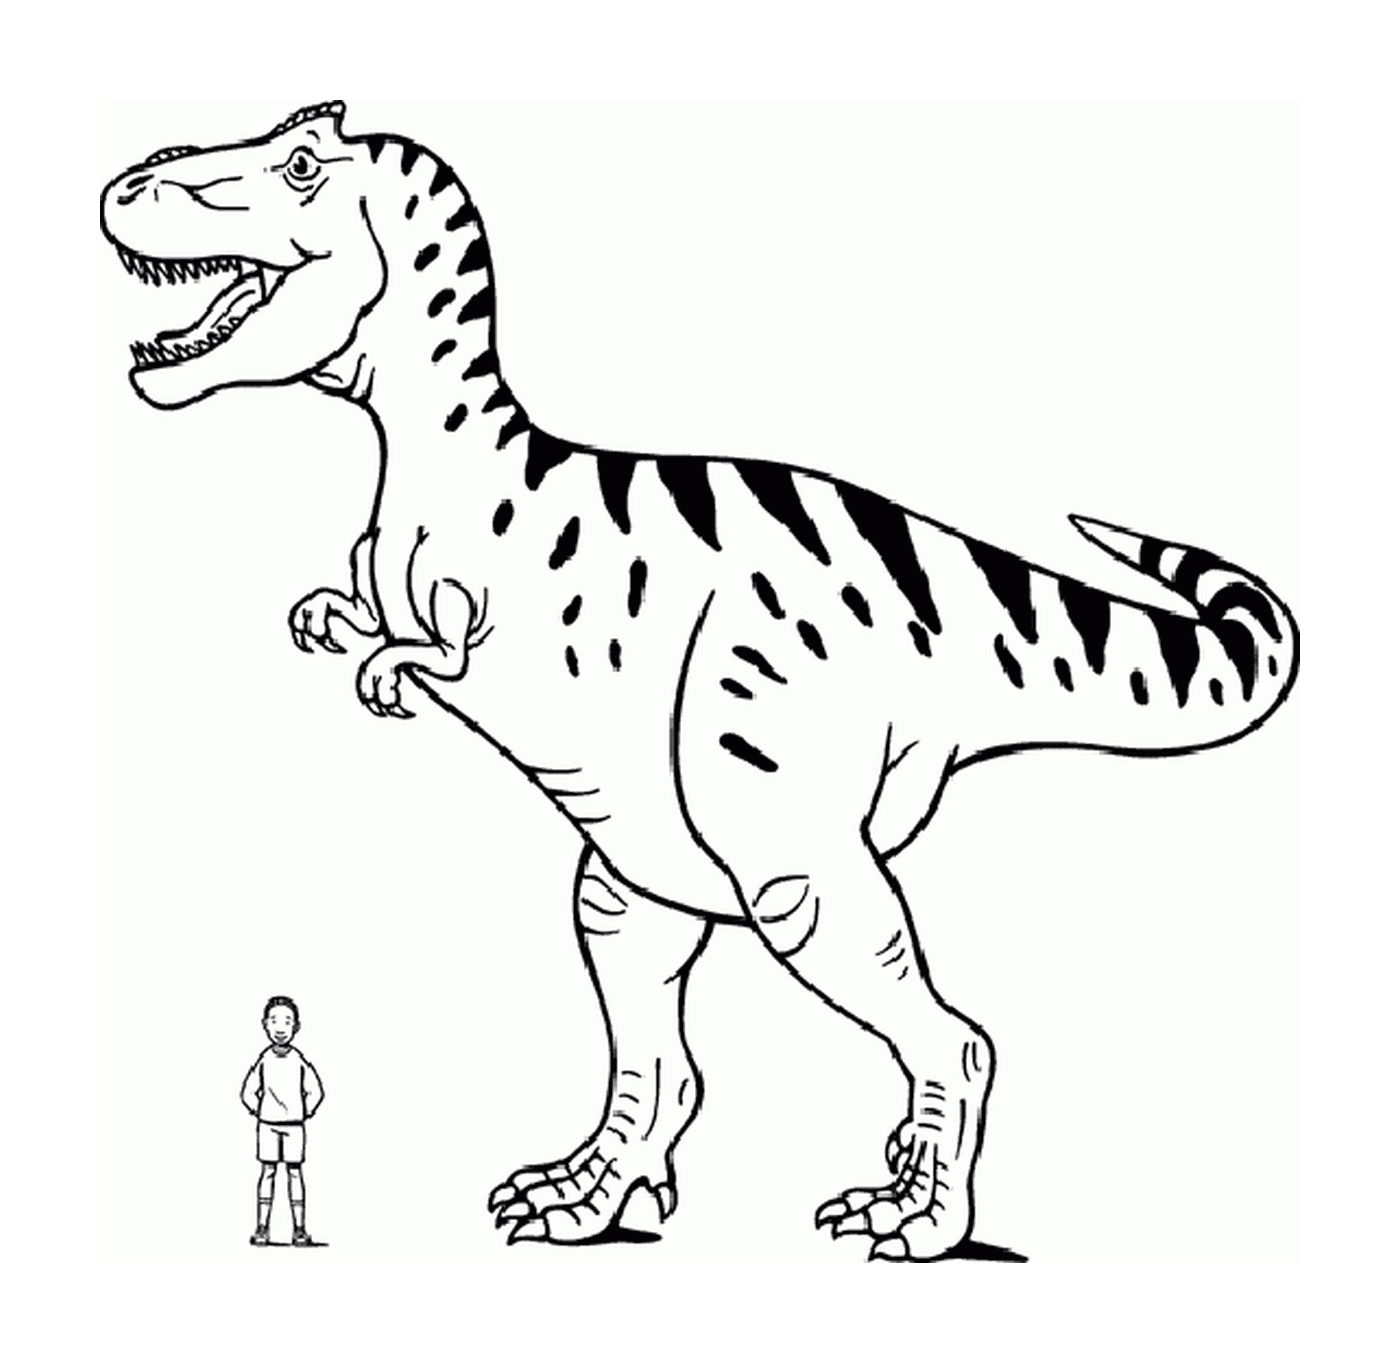  A tyrannosaur standing next to a person 